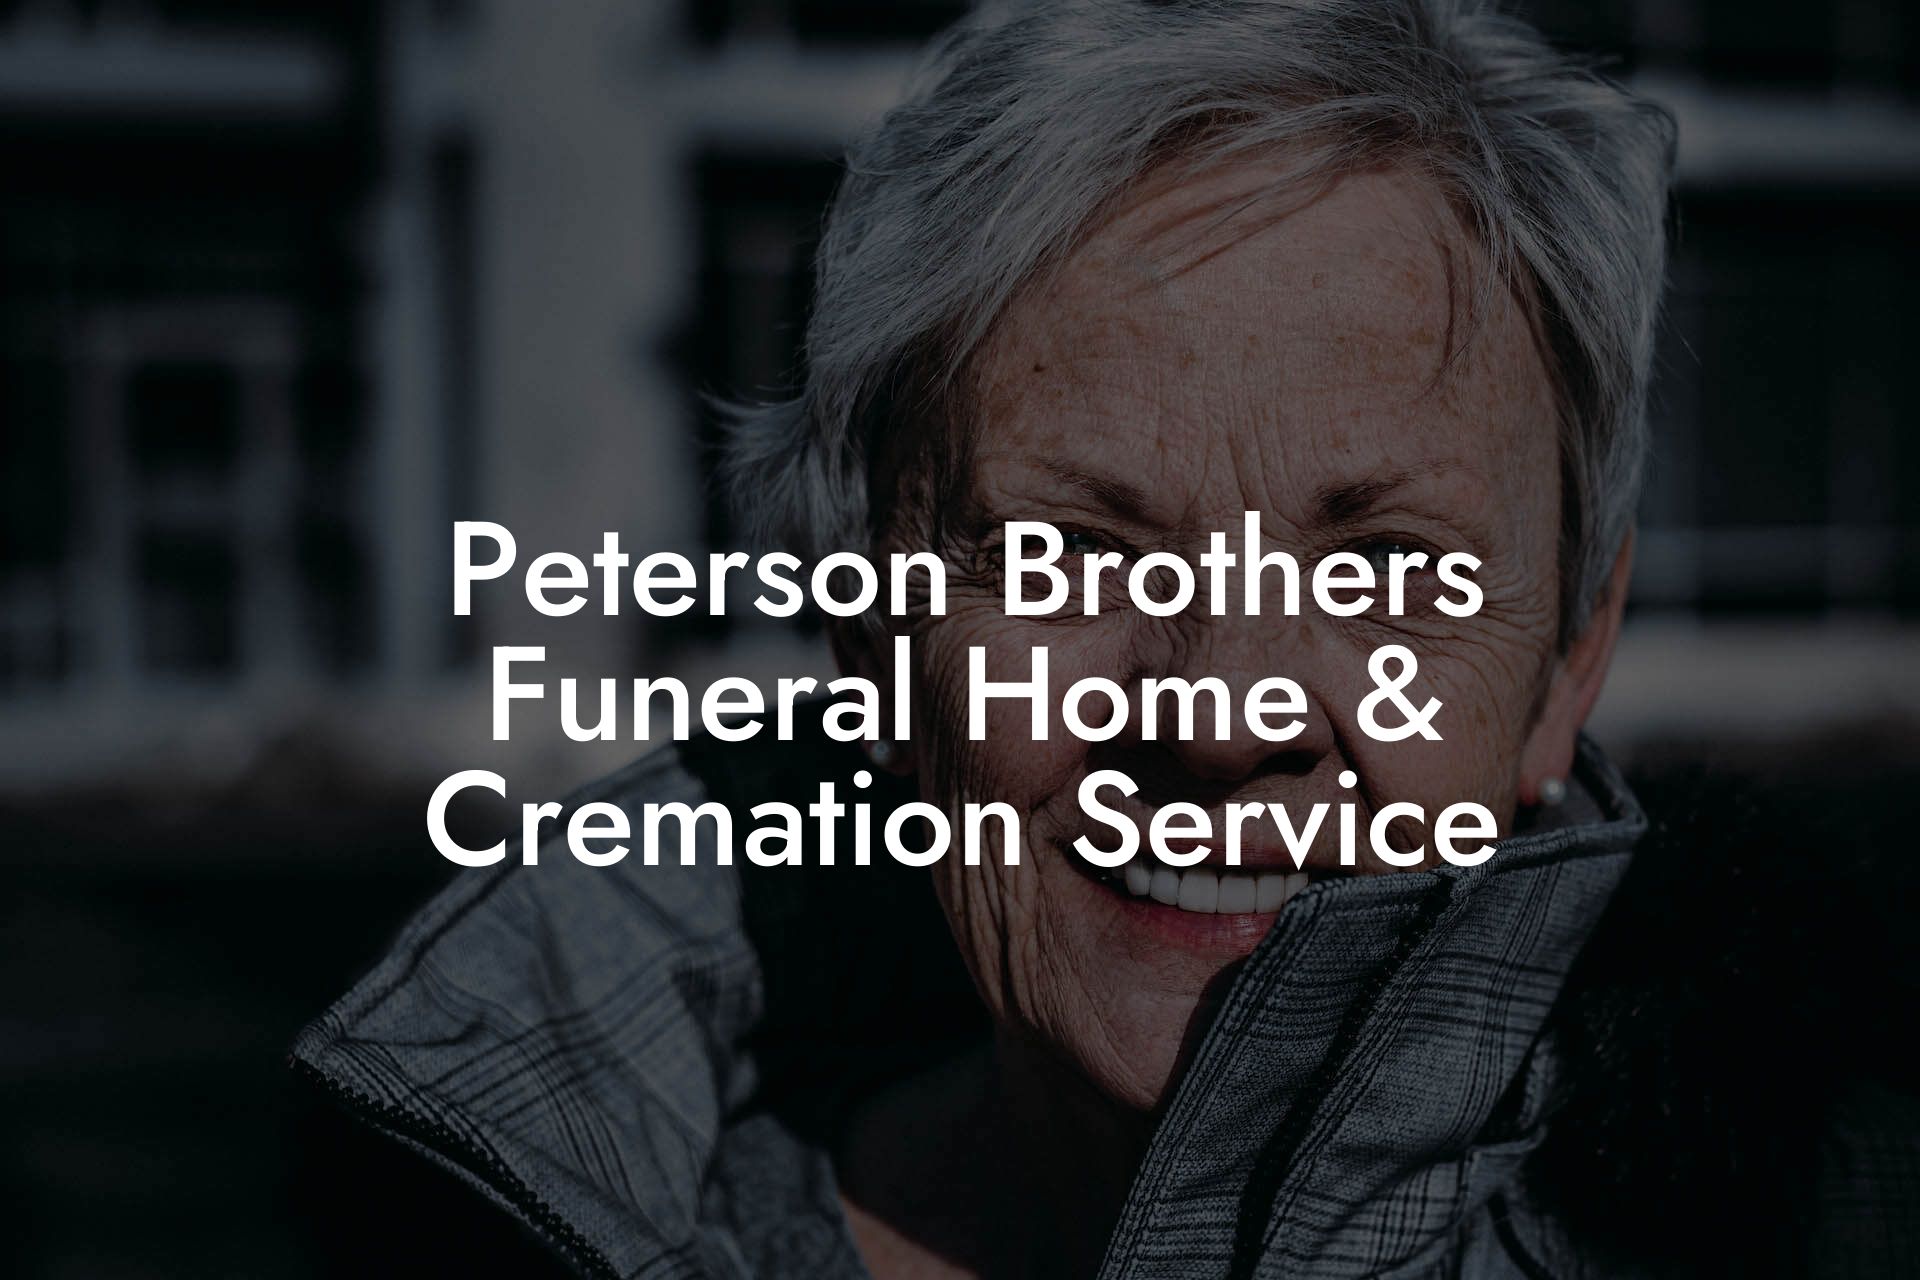 Peterson Brothers Funeral Home & Cremation Service Eulogy Assistant